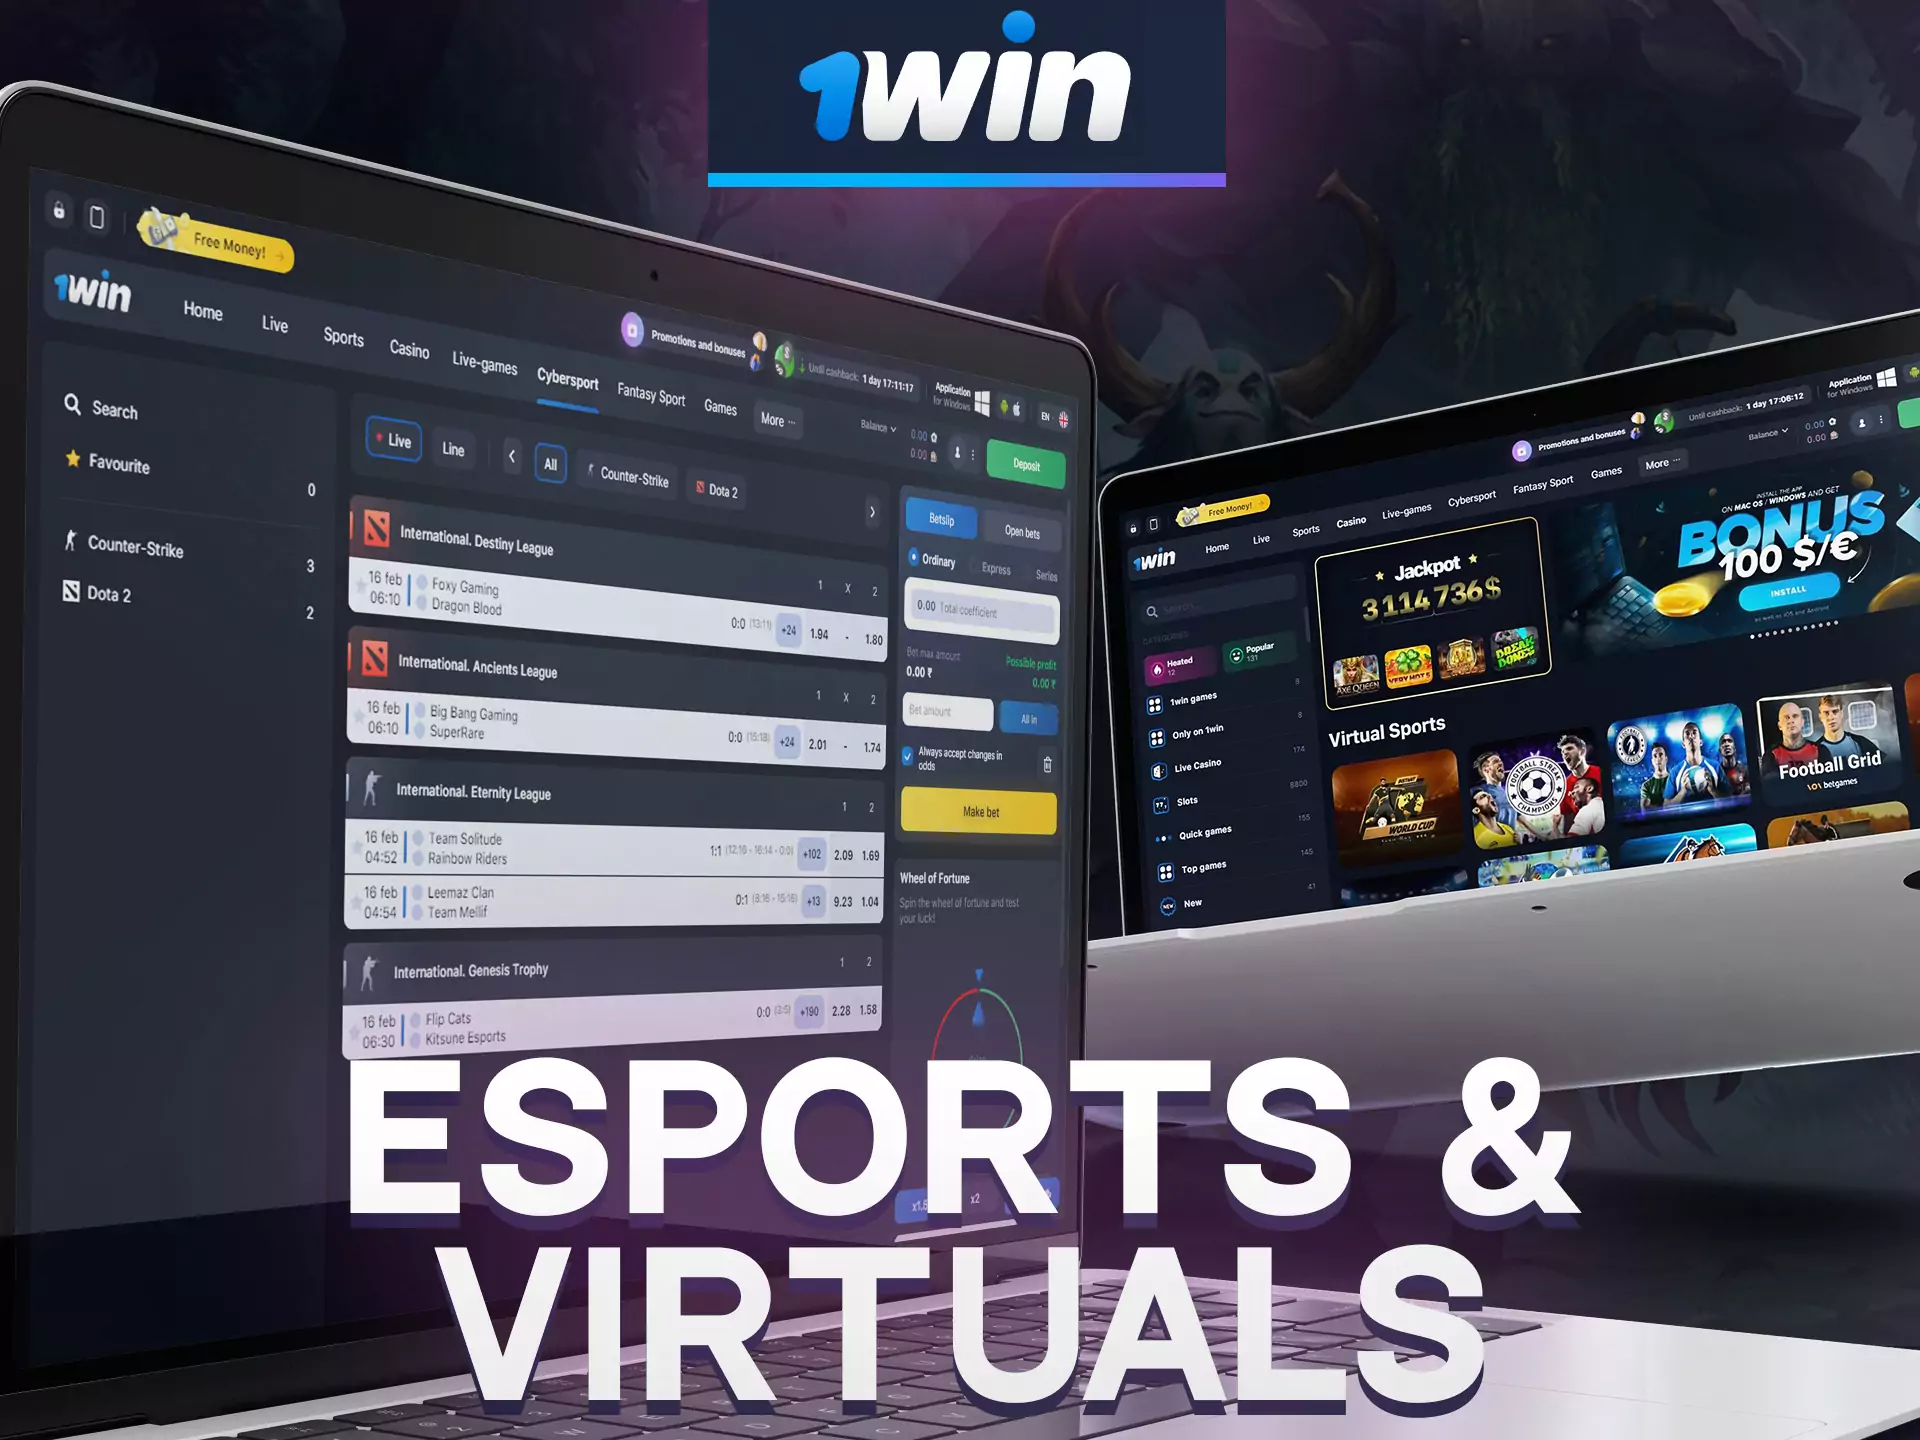 Try betting on new diciplines of esports and virtuals at 1win.